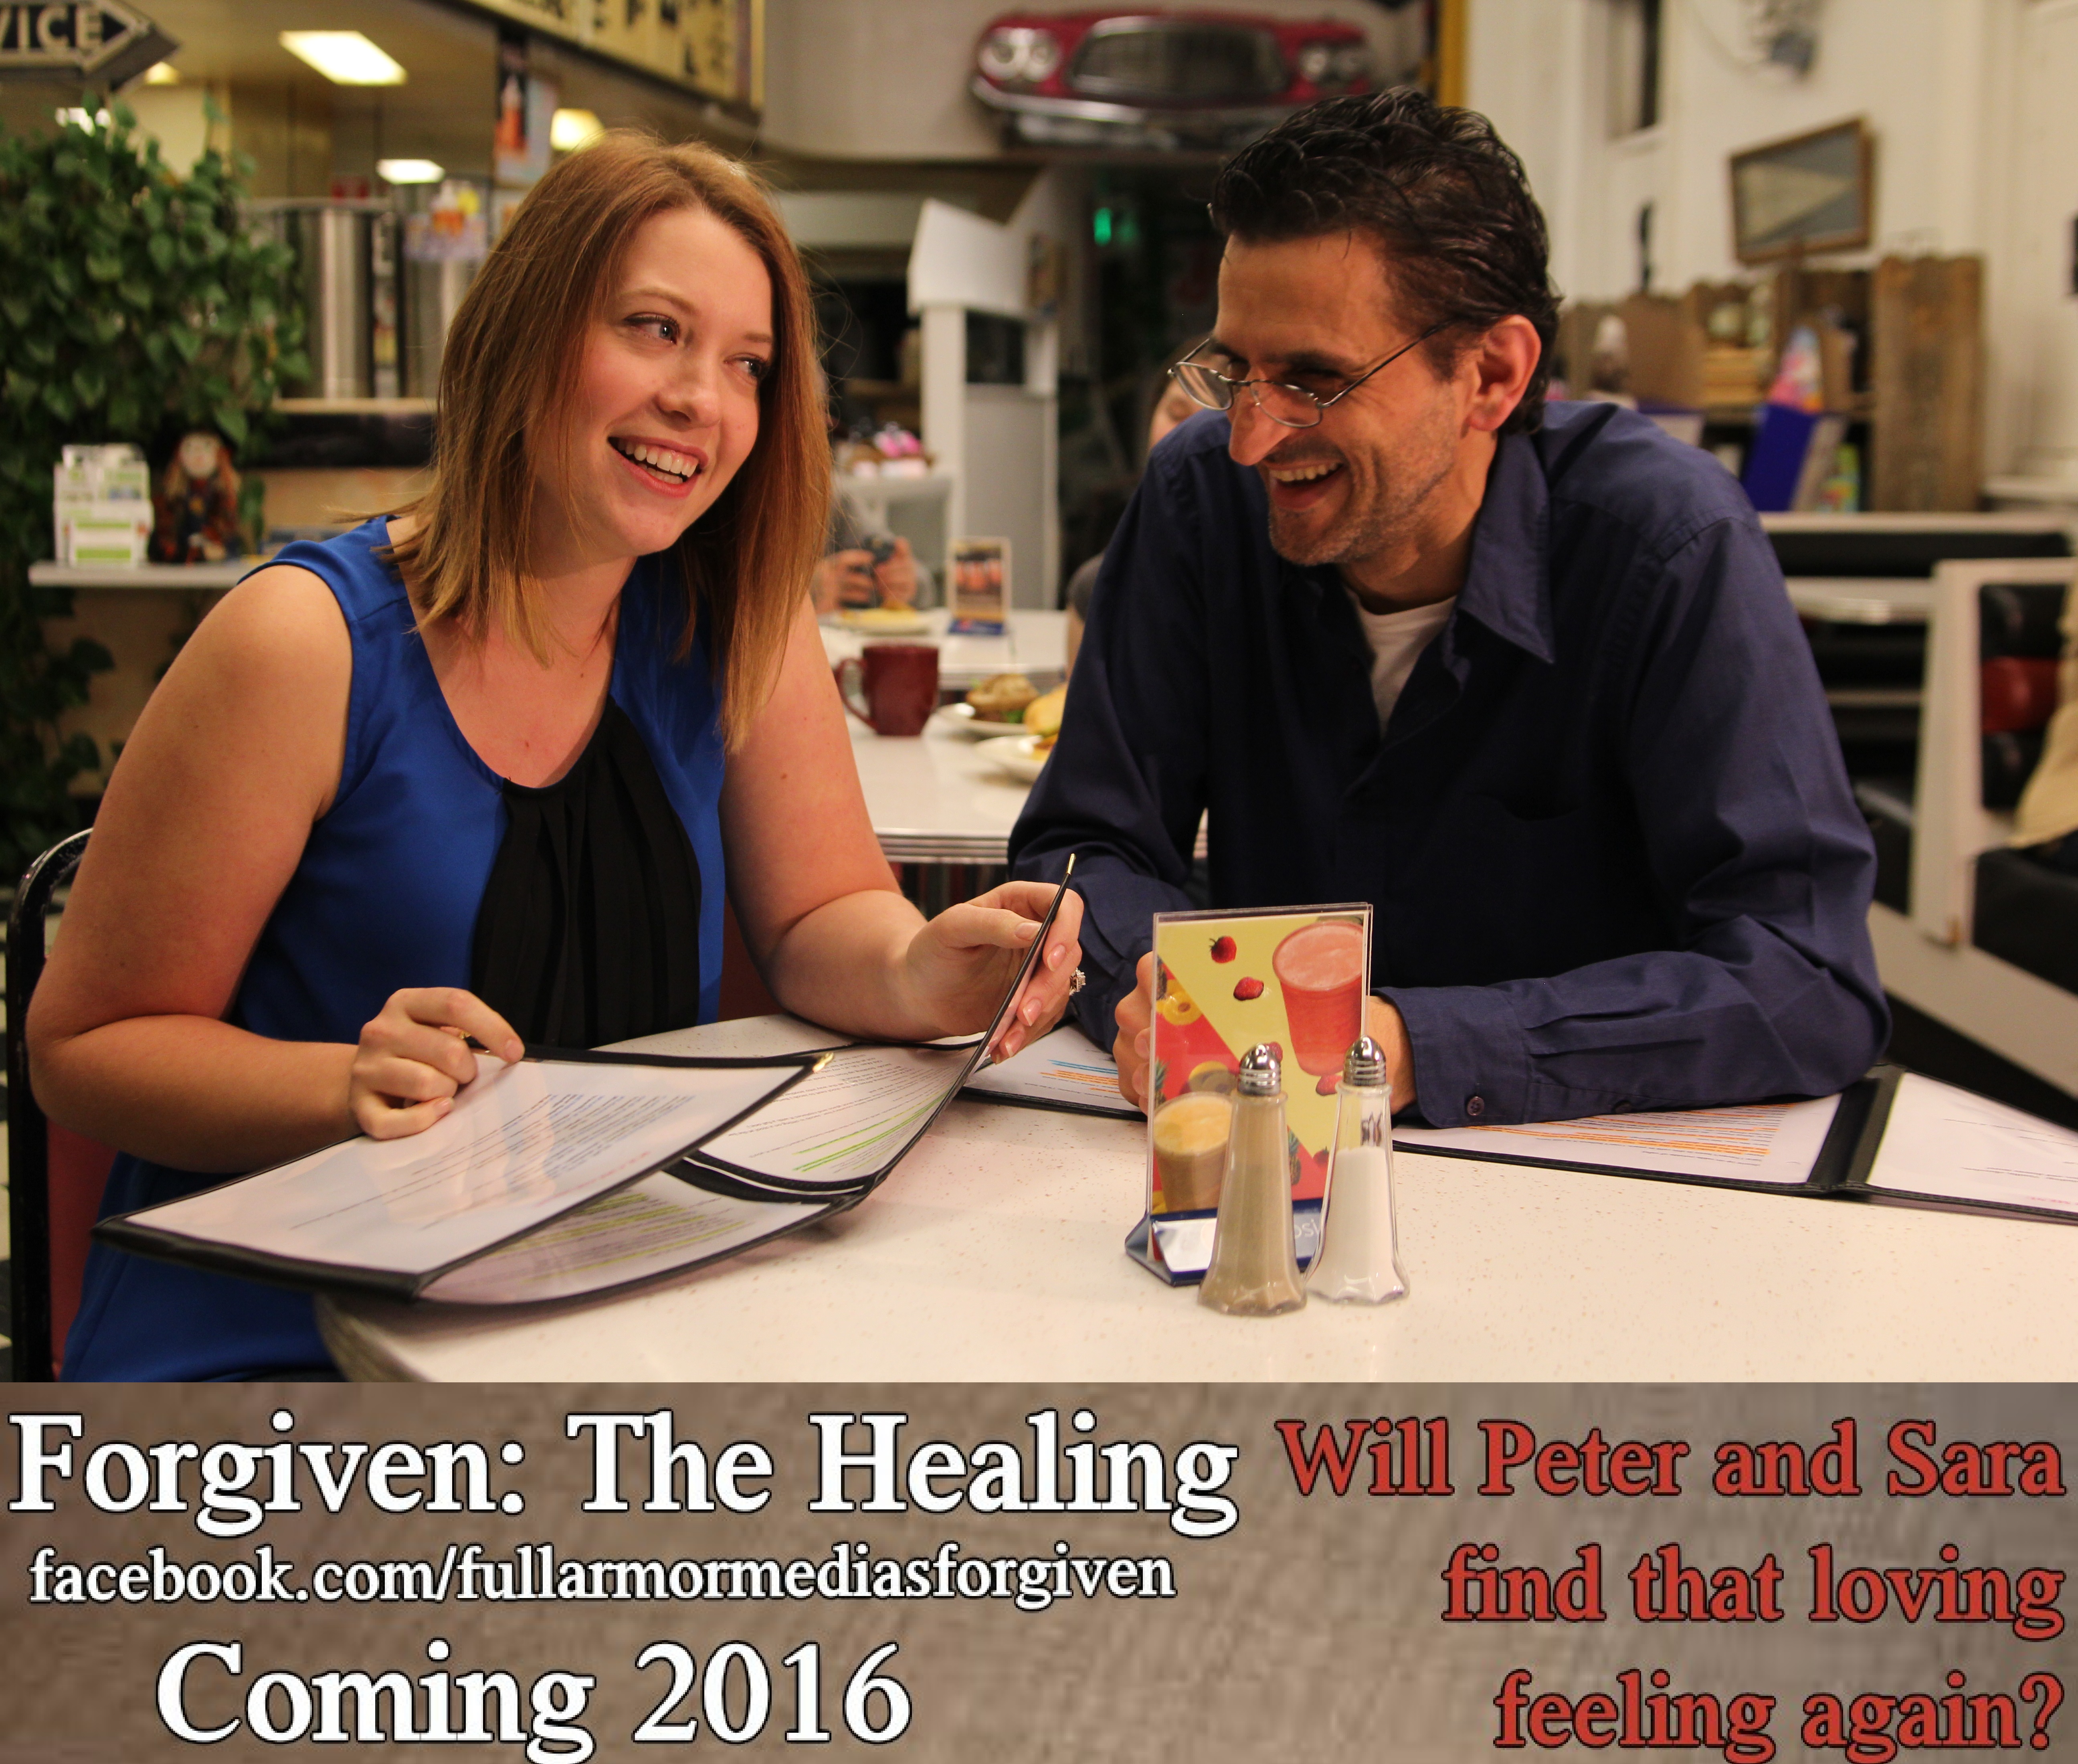 A promotional photo from Forgiven: The Healing